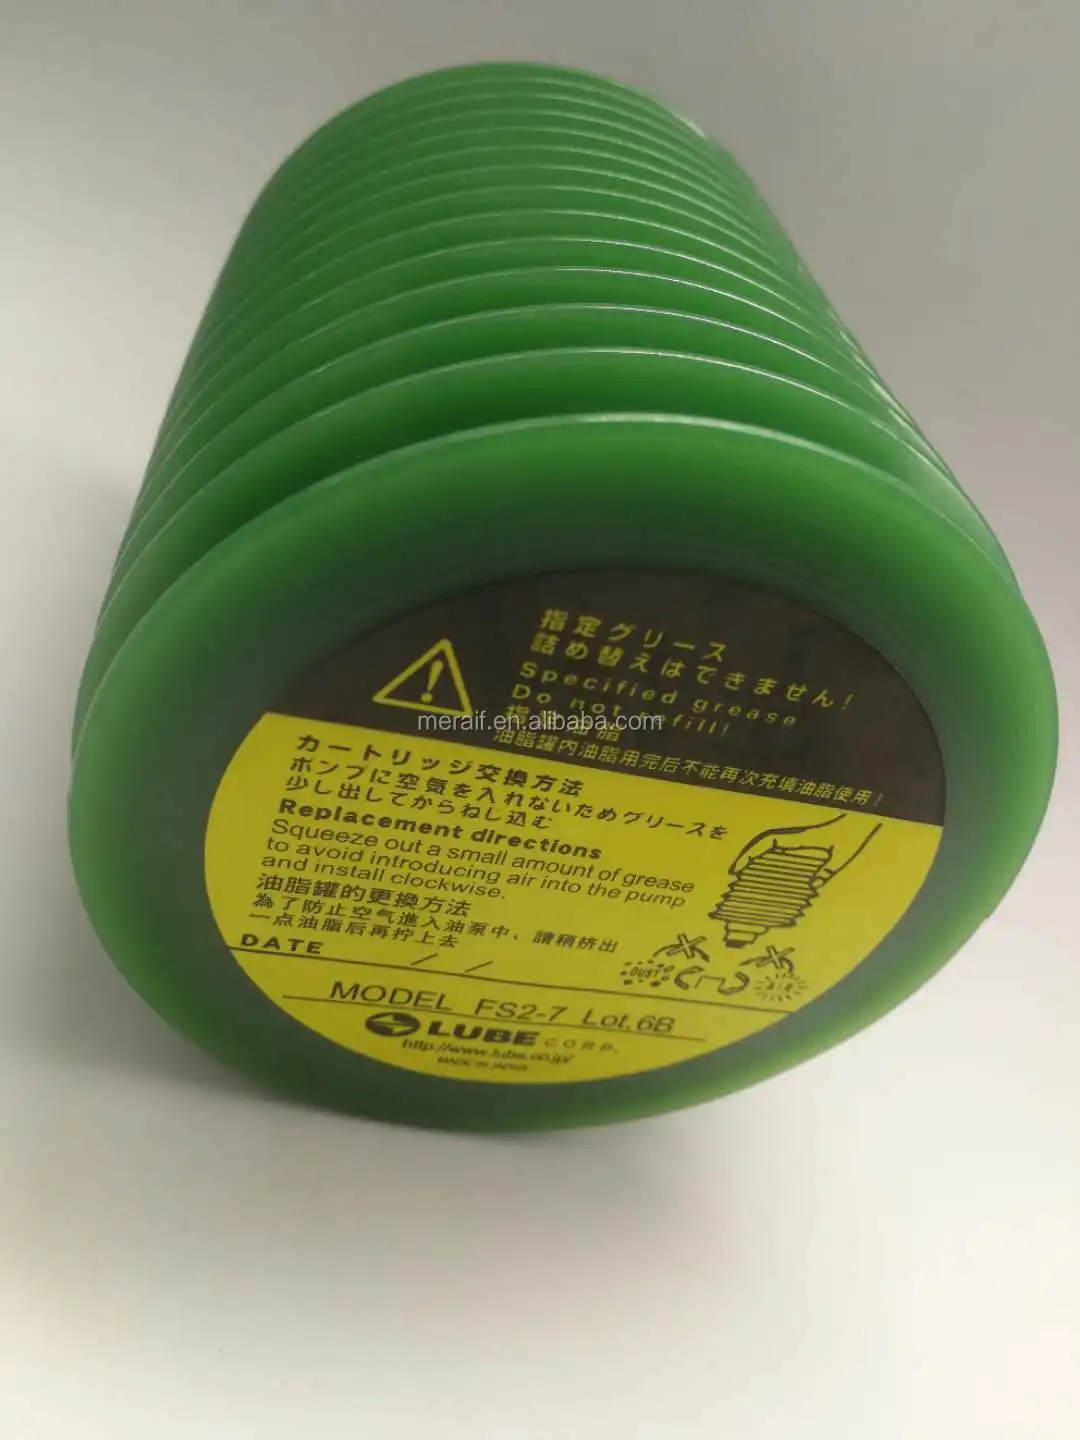 Original New Smt Grease Lube Grease Lube Lhl W100 700cc Grease For Injection Molding Machine Buy Smt Grease Lube Grease Lhl W100 700cc Grease Grease For Injection Molding Machine Product On Alibaba Com